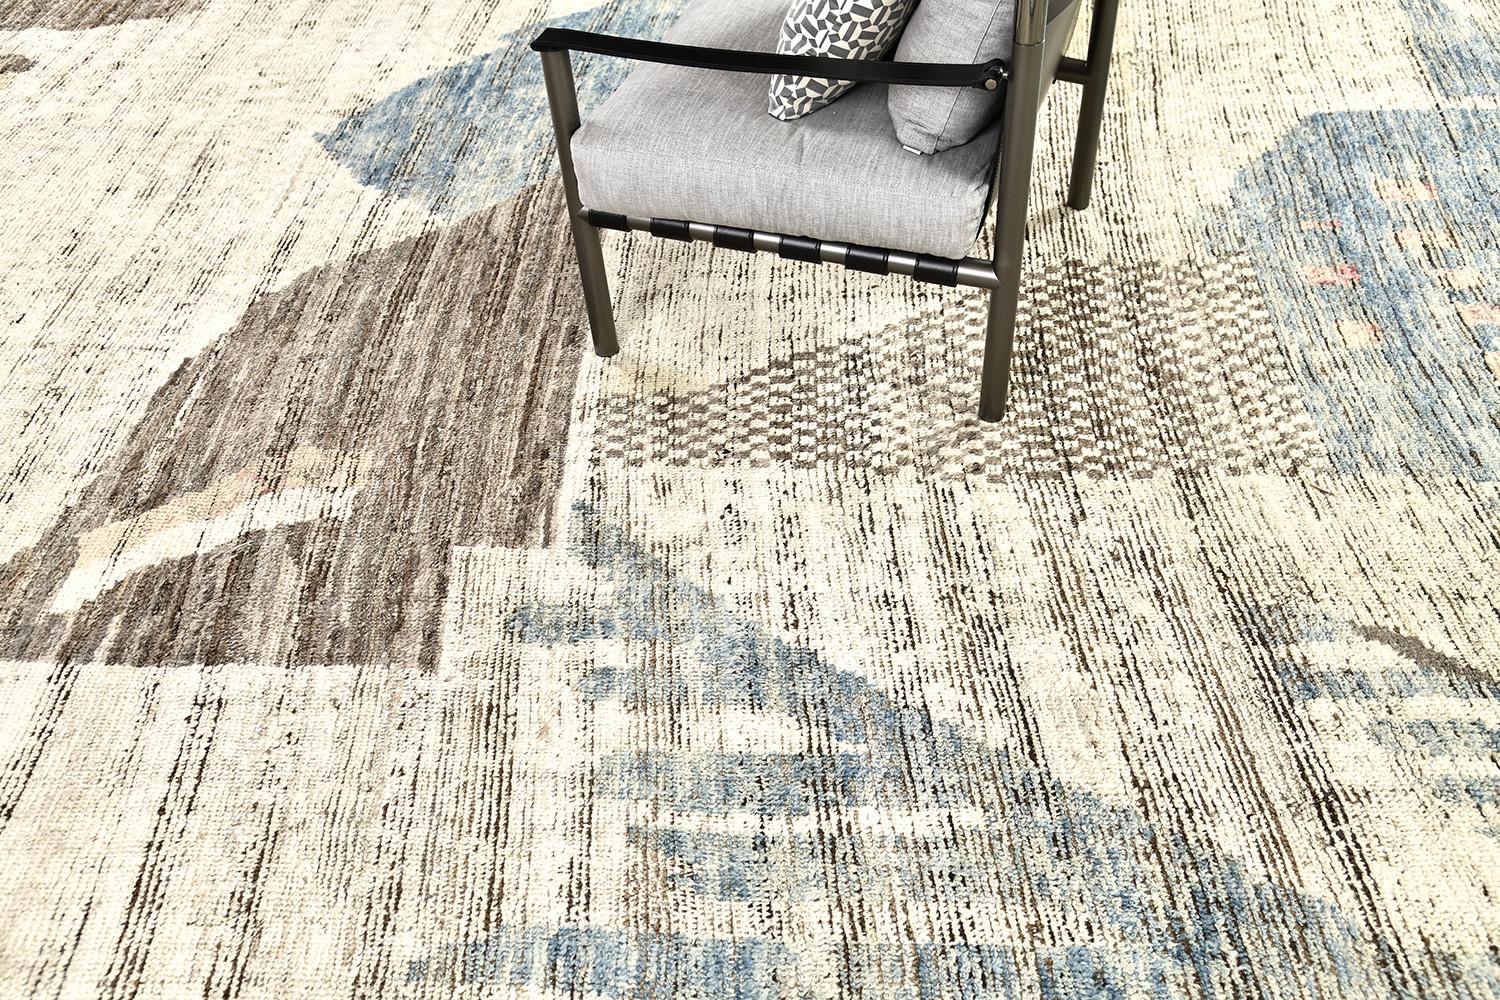 'Kaouki' is made of luxurious wool and is made of timeless design elements. Its weaving of natural earth tones with vibrant colors and unique design patterns and shapes is what makes the Atlas Collection so unique and sought after. Mehraban's Atlas